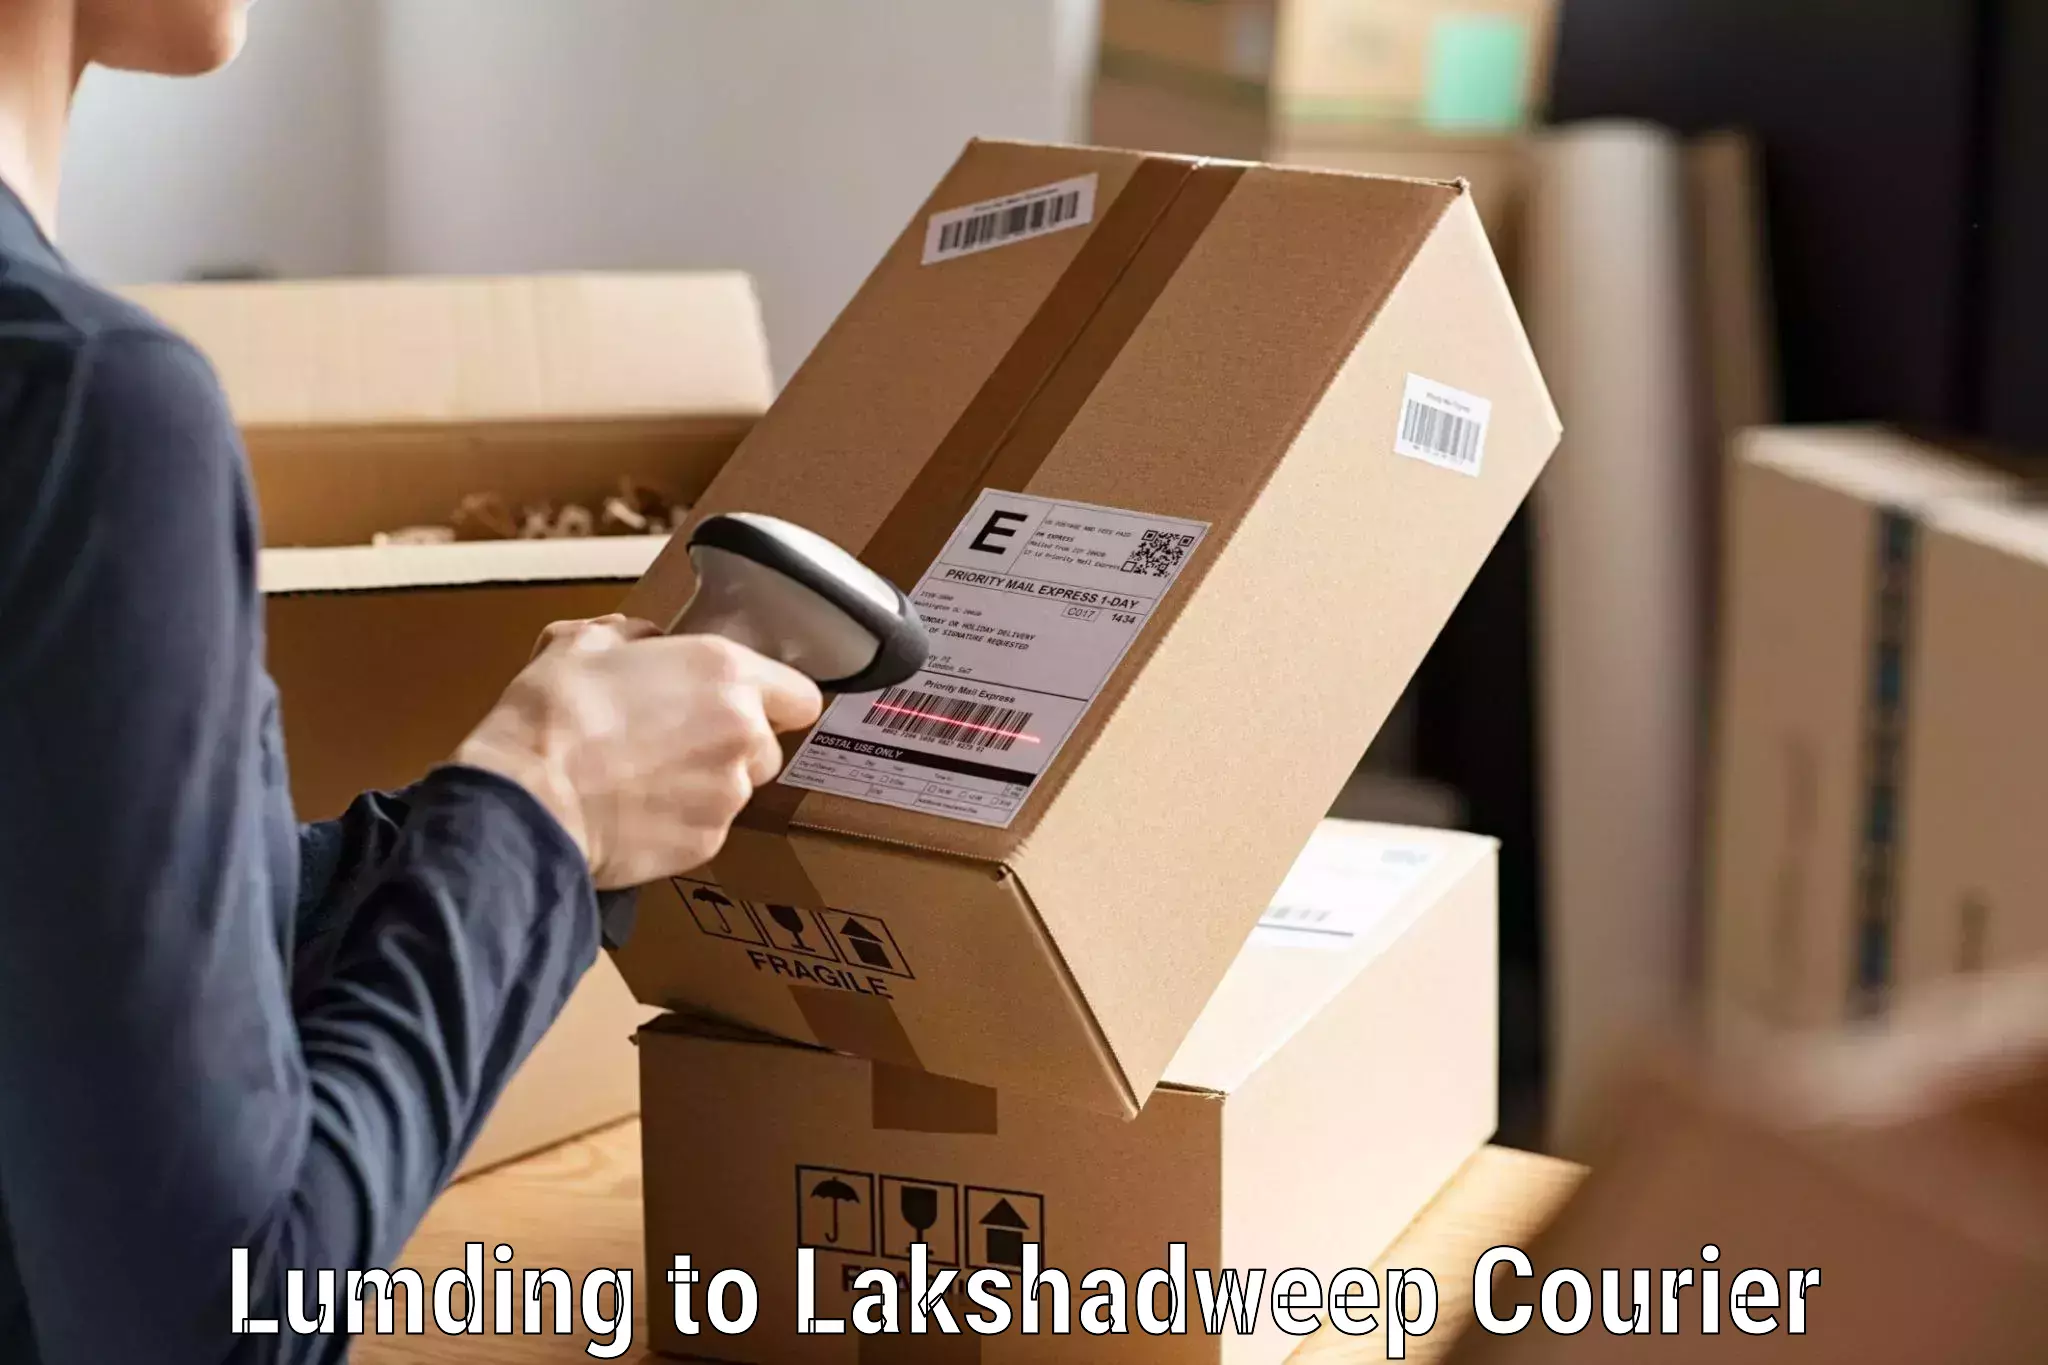 User-friendly delivery service Lumding to Lakshadweep